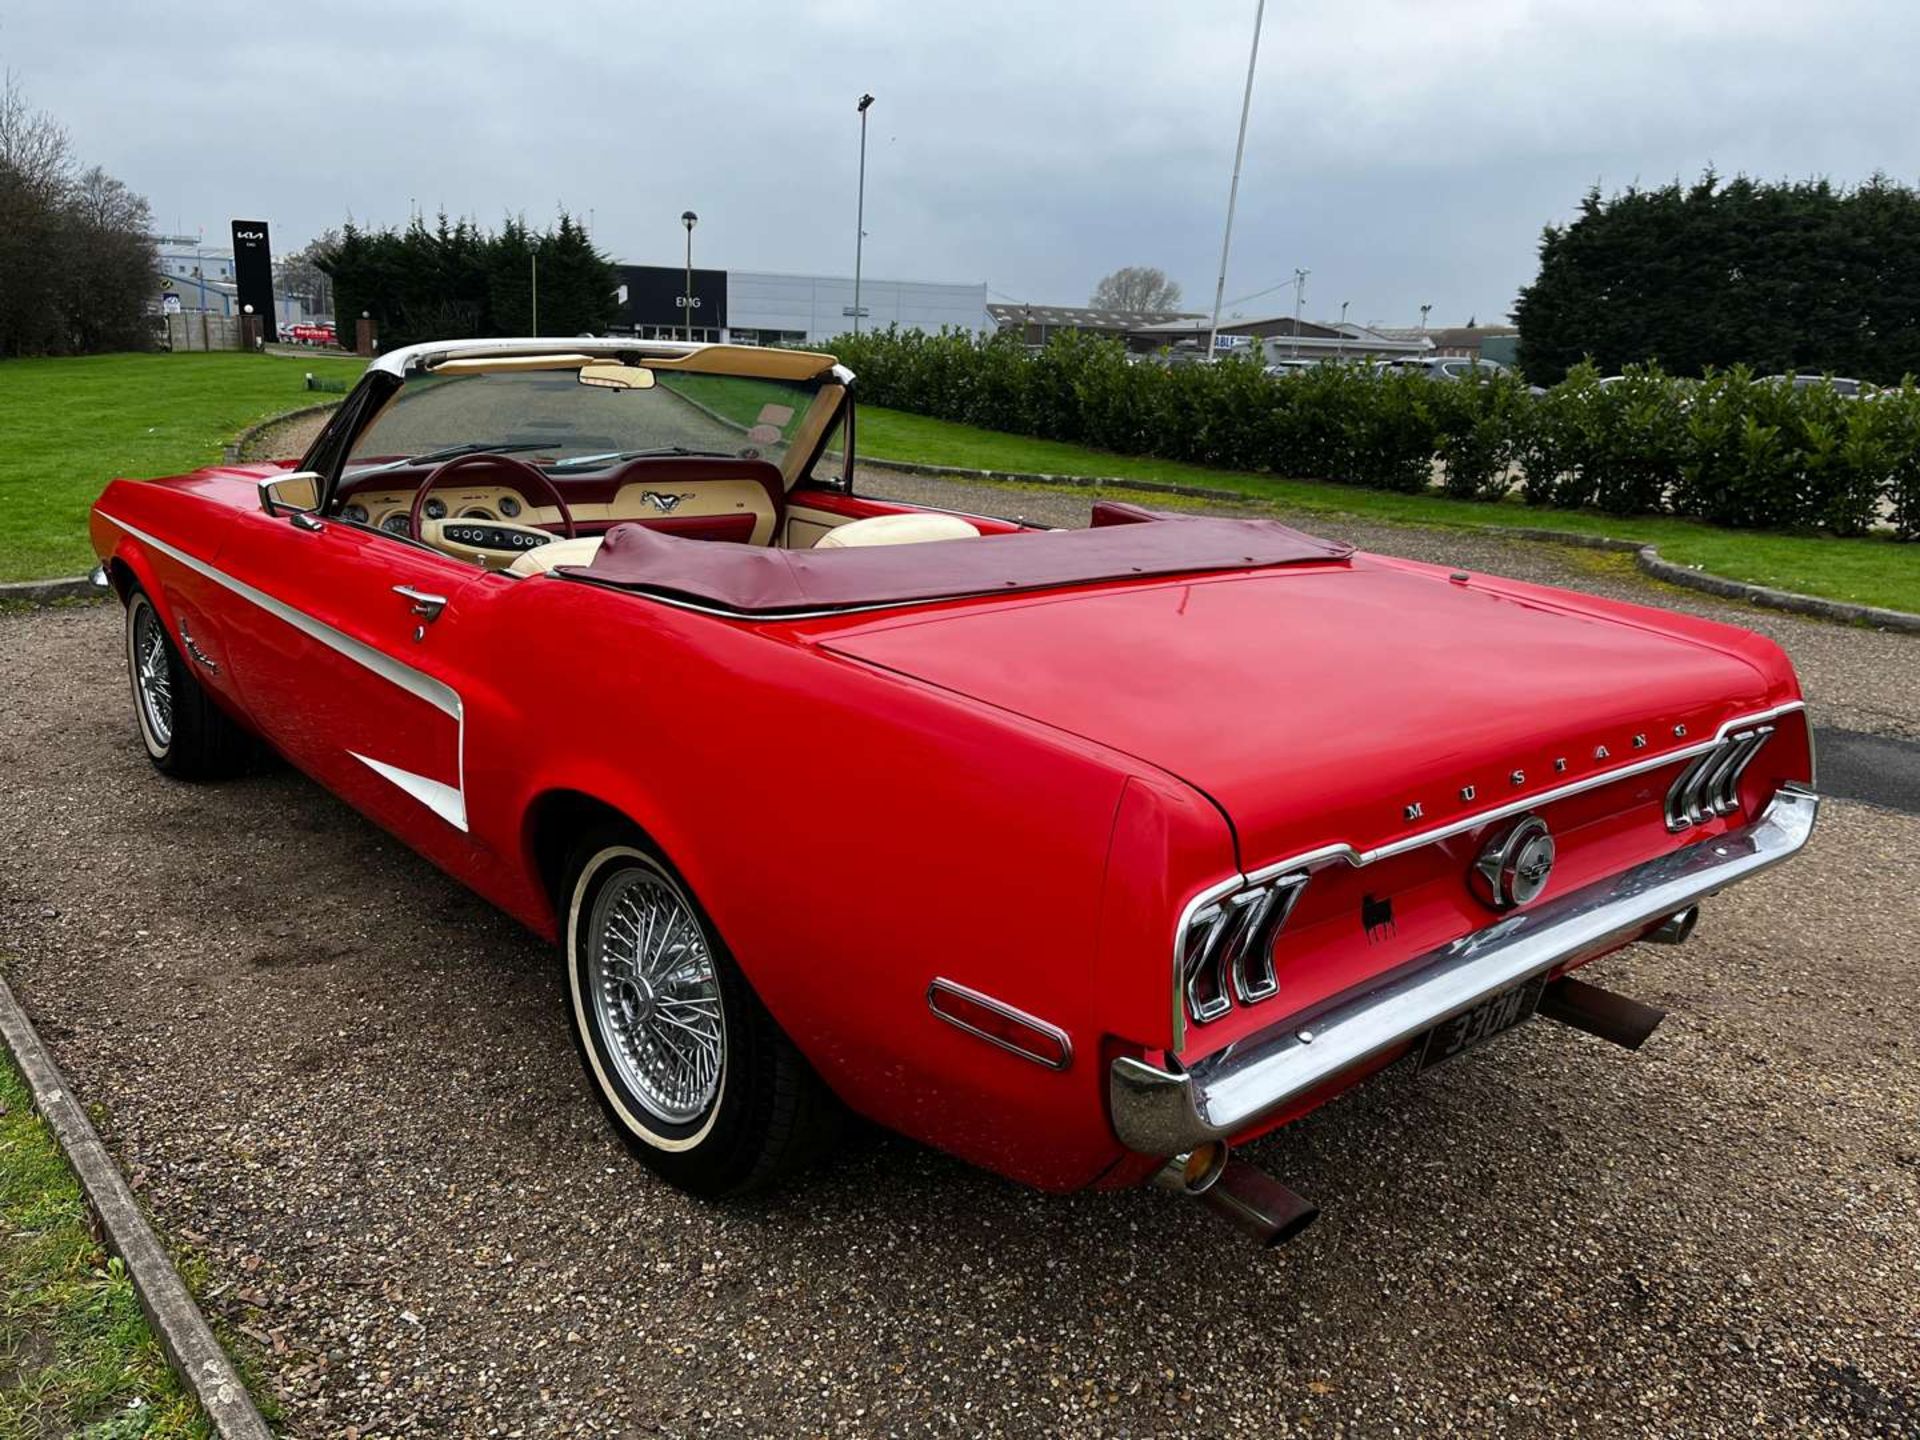 1968 FORD MUSTANG 4.7 V8 AUTO CONVERTIBLE LHD - Image 6 of 30